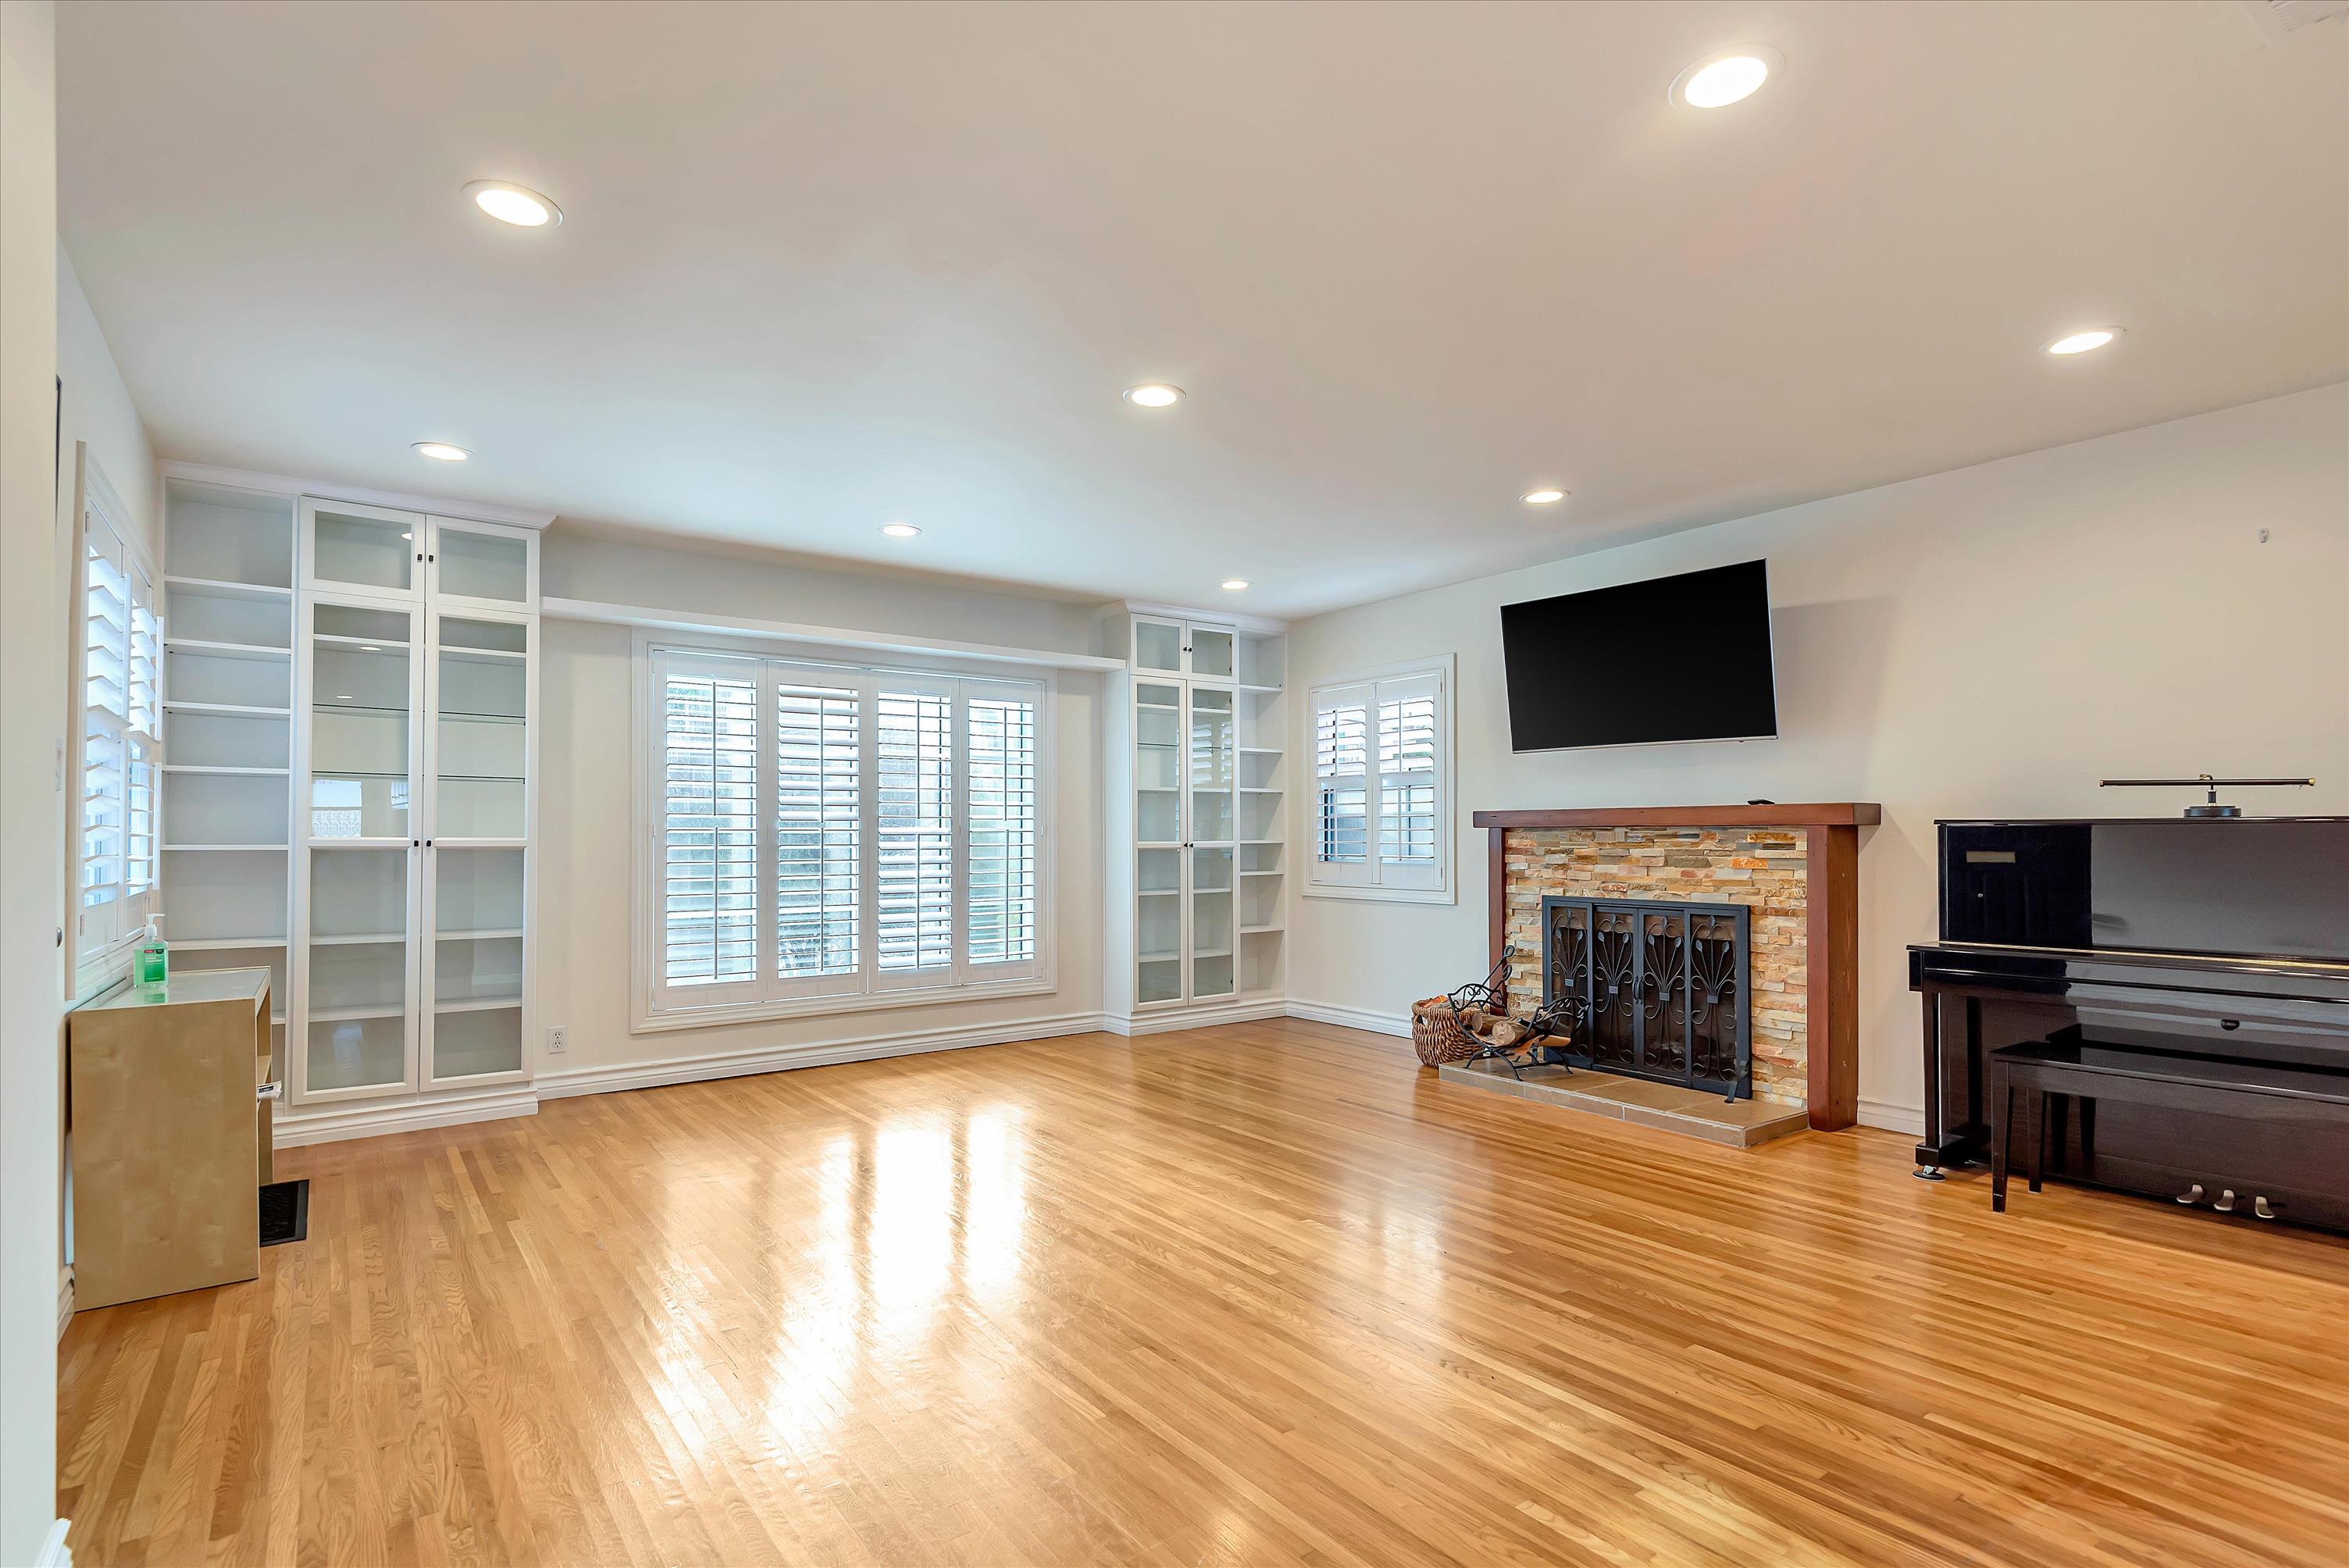 Beautiful Crescent Ridge, Raleigh, NC house showcasing the best property management services